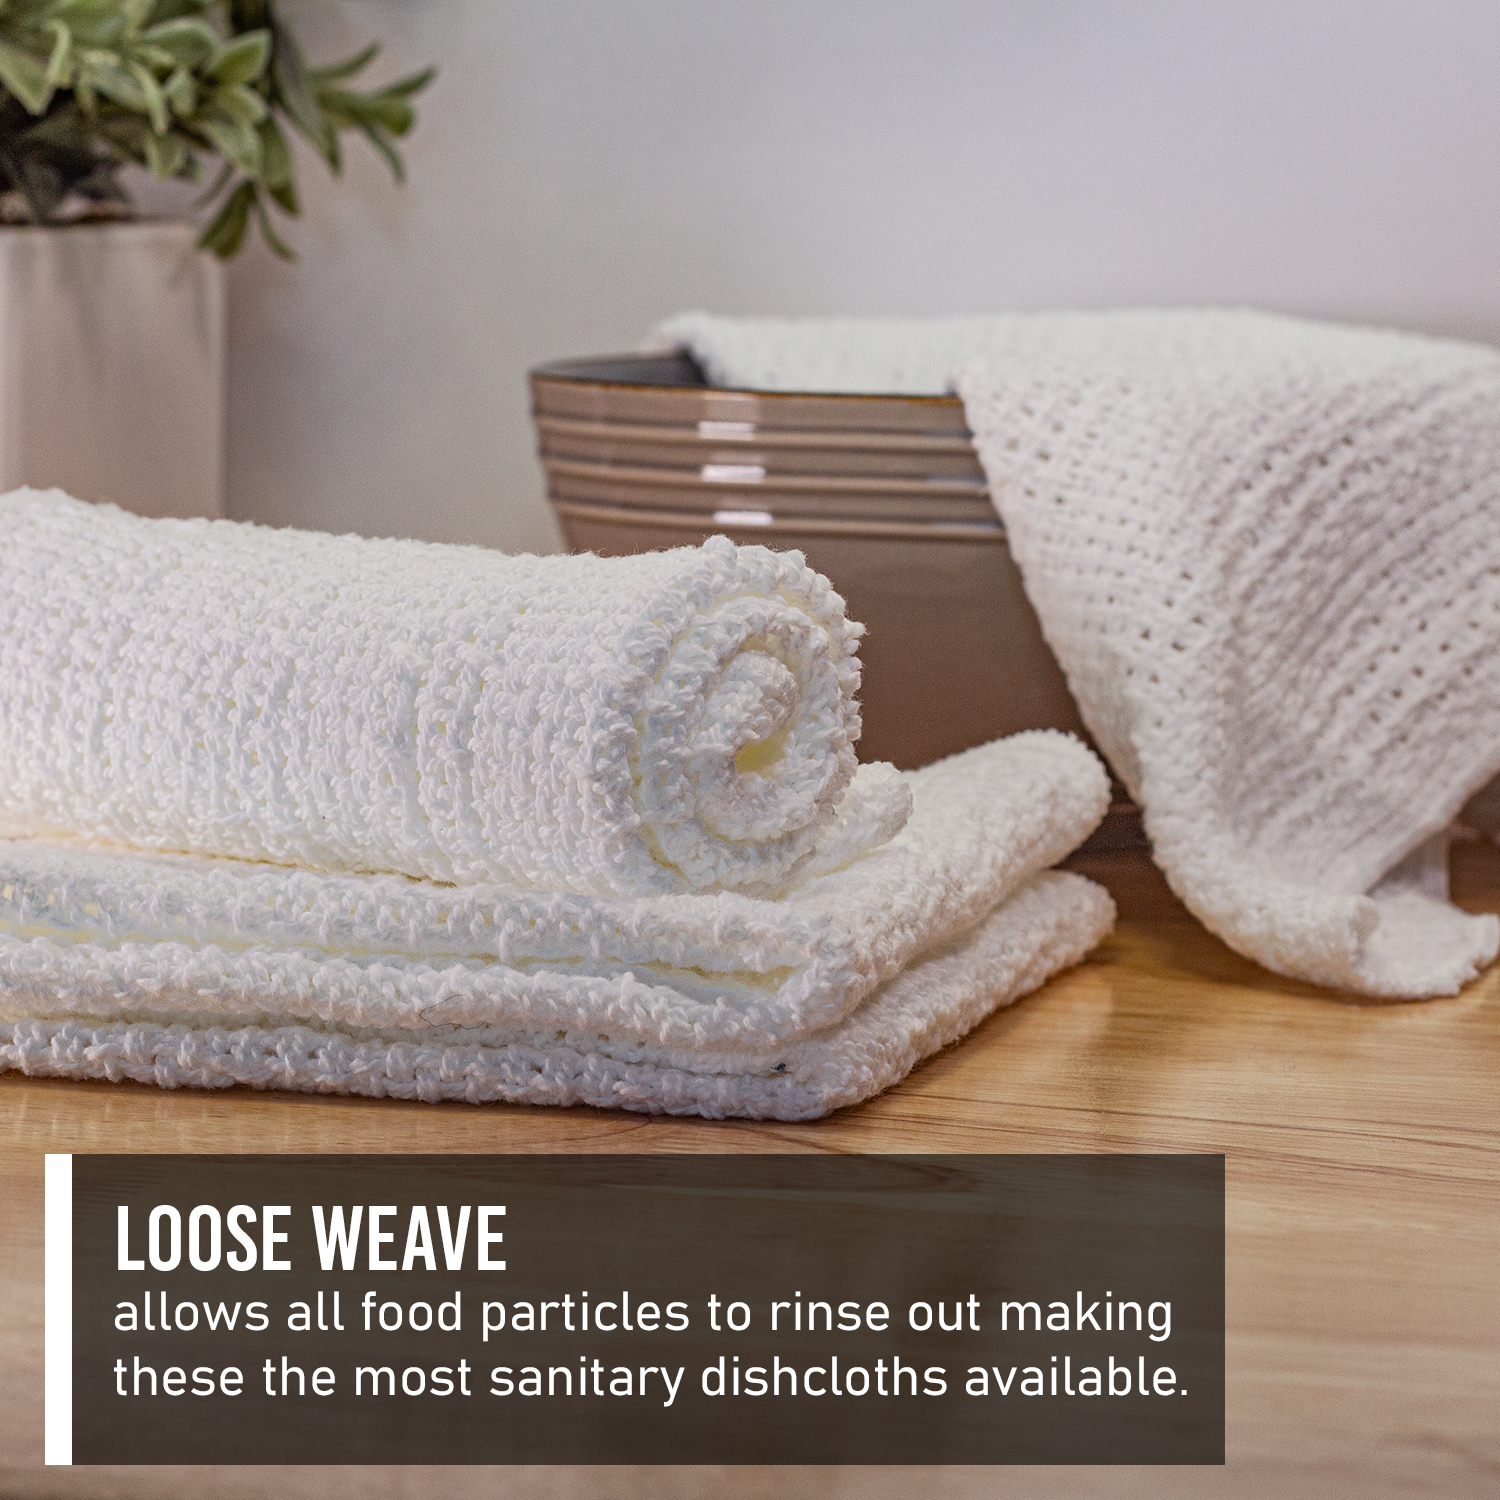 https://countrycottons.net/wp-content/uploads/04-Dishcloths_Loose-Weave.jpg